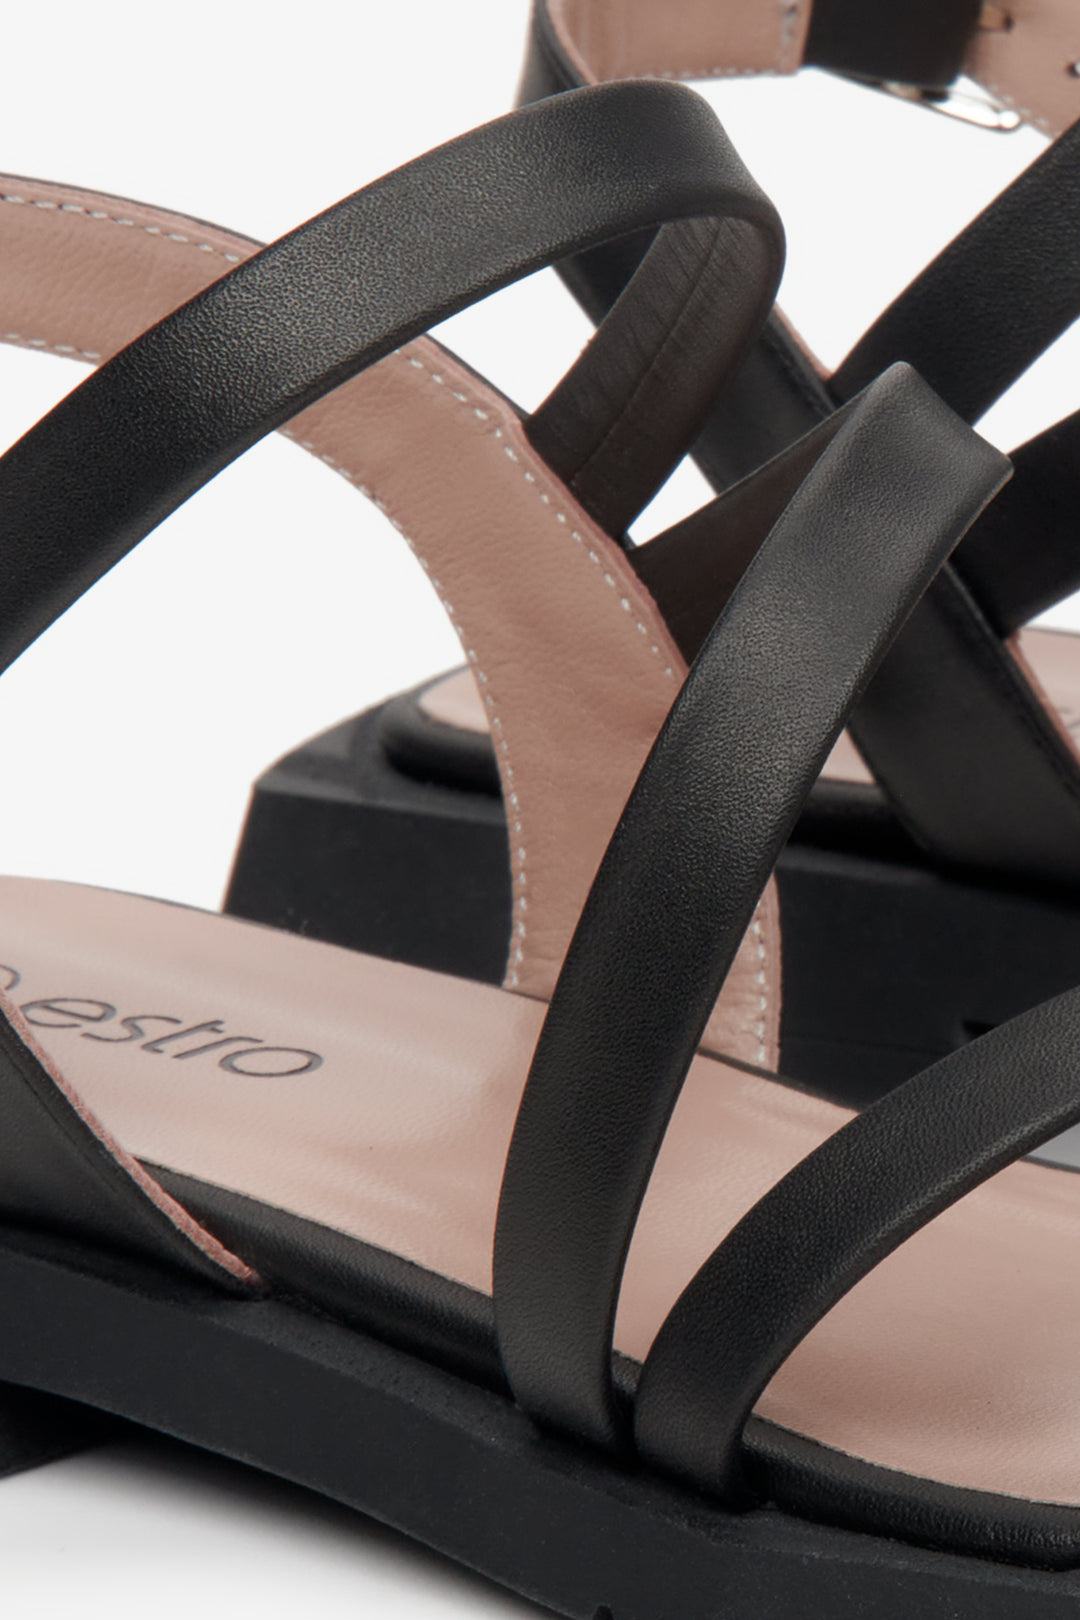 Leather, women's black sandals by Estro with thin straps - presentation of the rear part of the footwear.